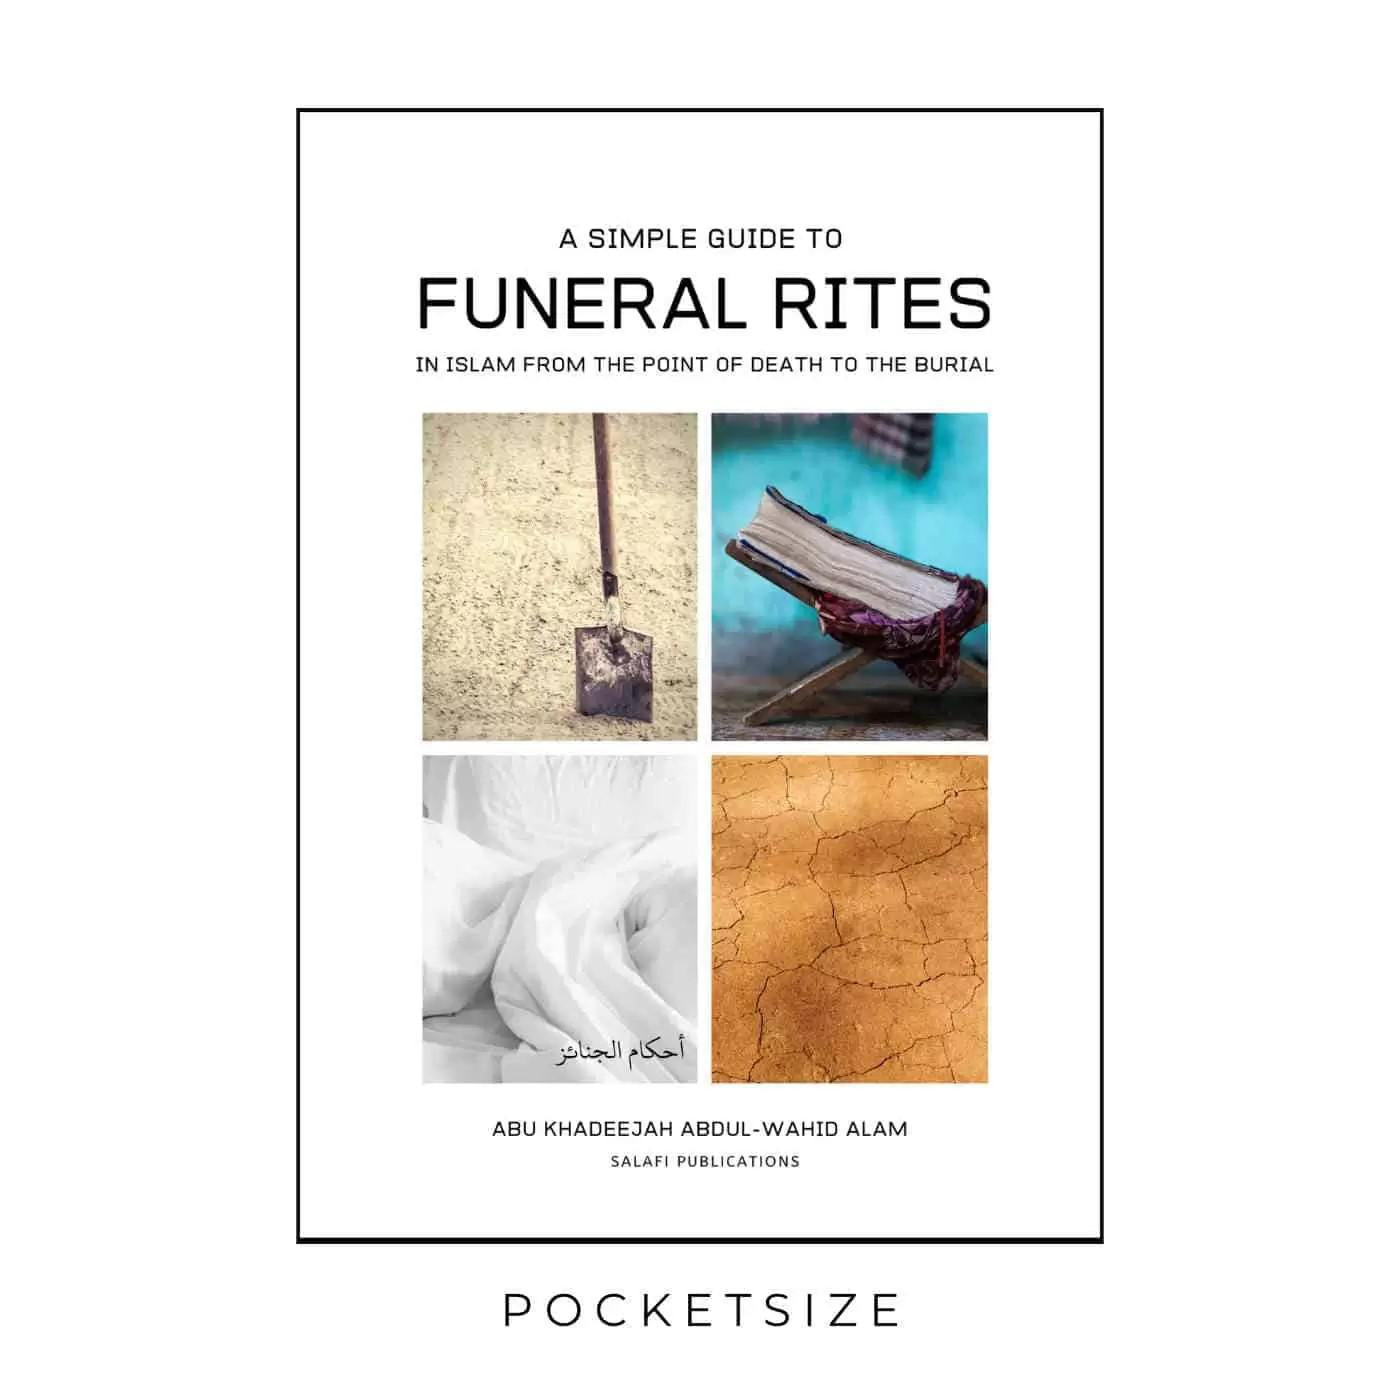 A Simple Guide To Funeral Rites In Islam From The Point Of Death To The Burial (Pocket Size)